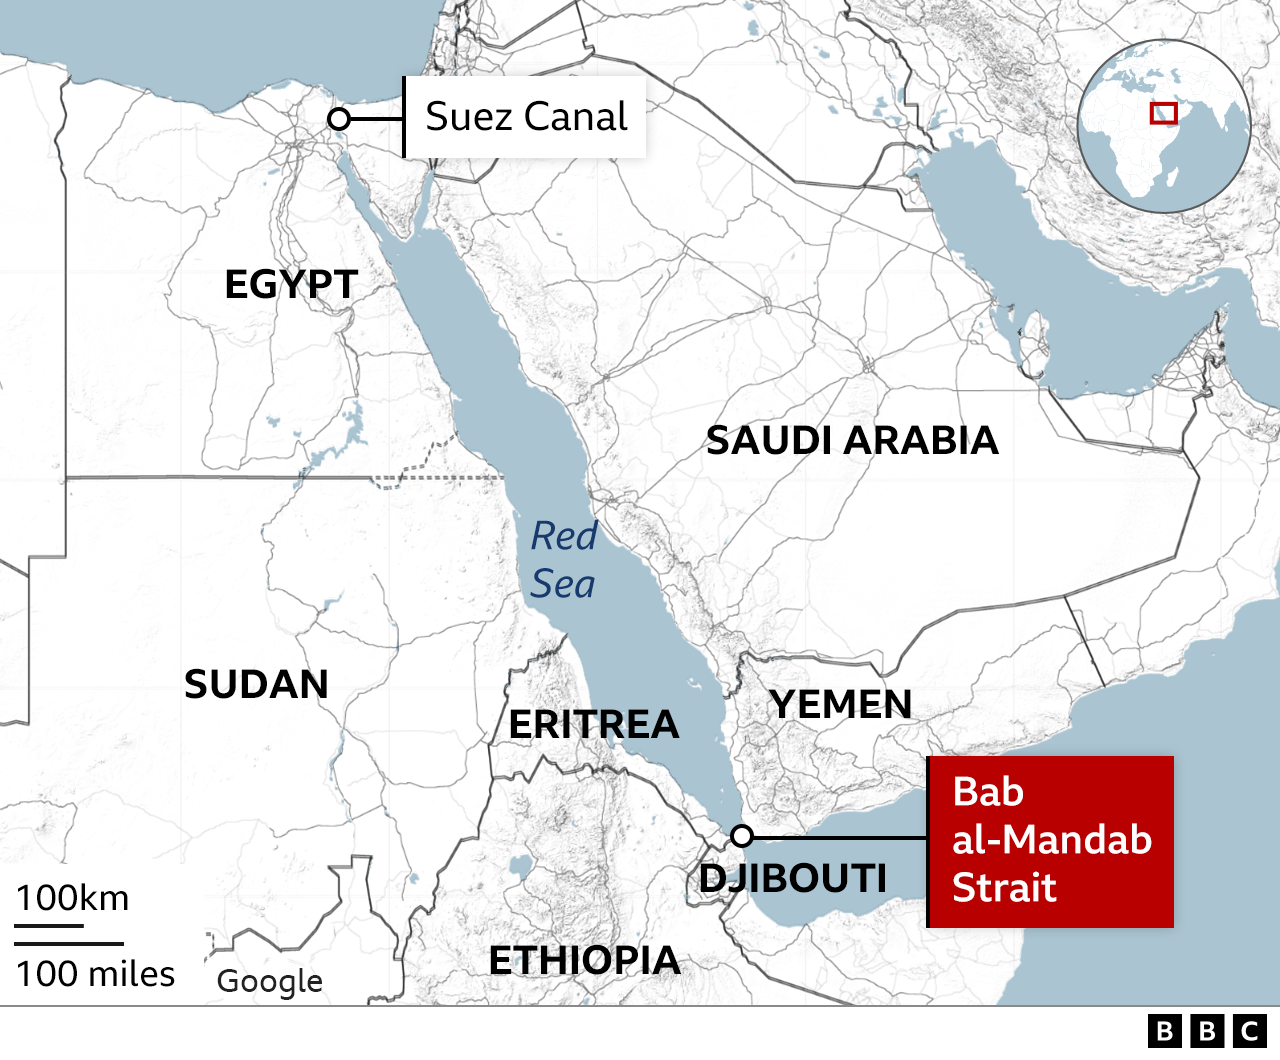 A map showing the Bab al-Mandab strait, which sits between Yemen on the Arabian Peninsula and Djibouti and Eritrea on the African coast